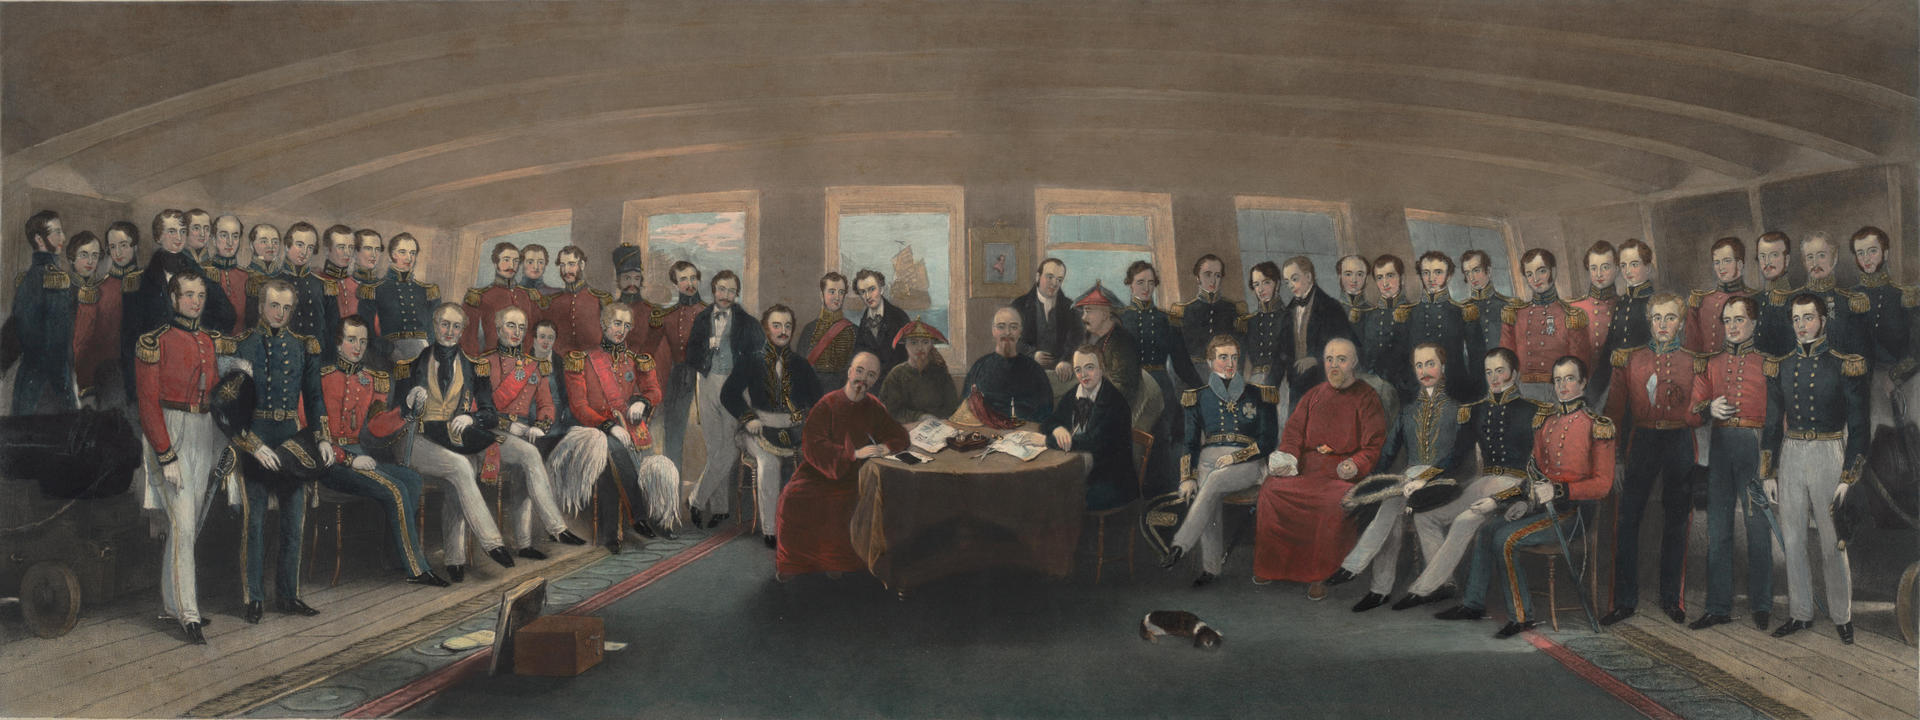 An 1846 engraving of the signing of the Treaty of Nanking. Seated at the table are Chinese negotiator Keying (second left) and Sir Henry Pottinger, Hong Kong’s first governor. Picture: Brown University Library